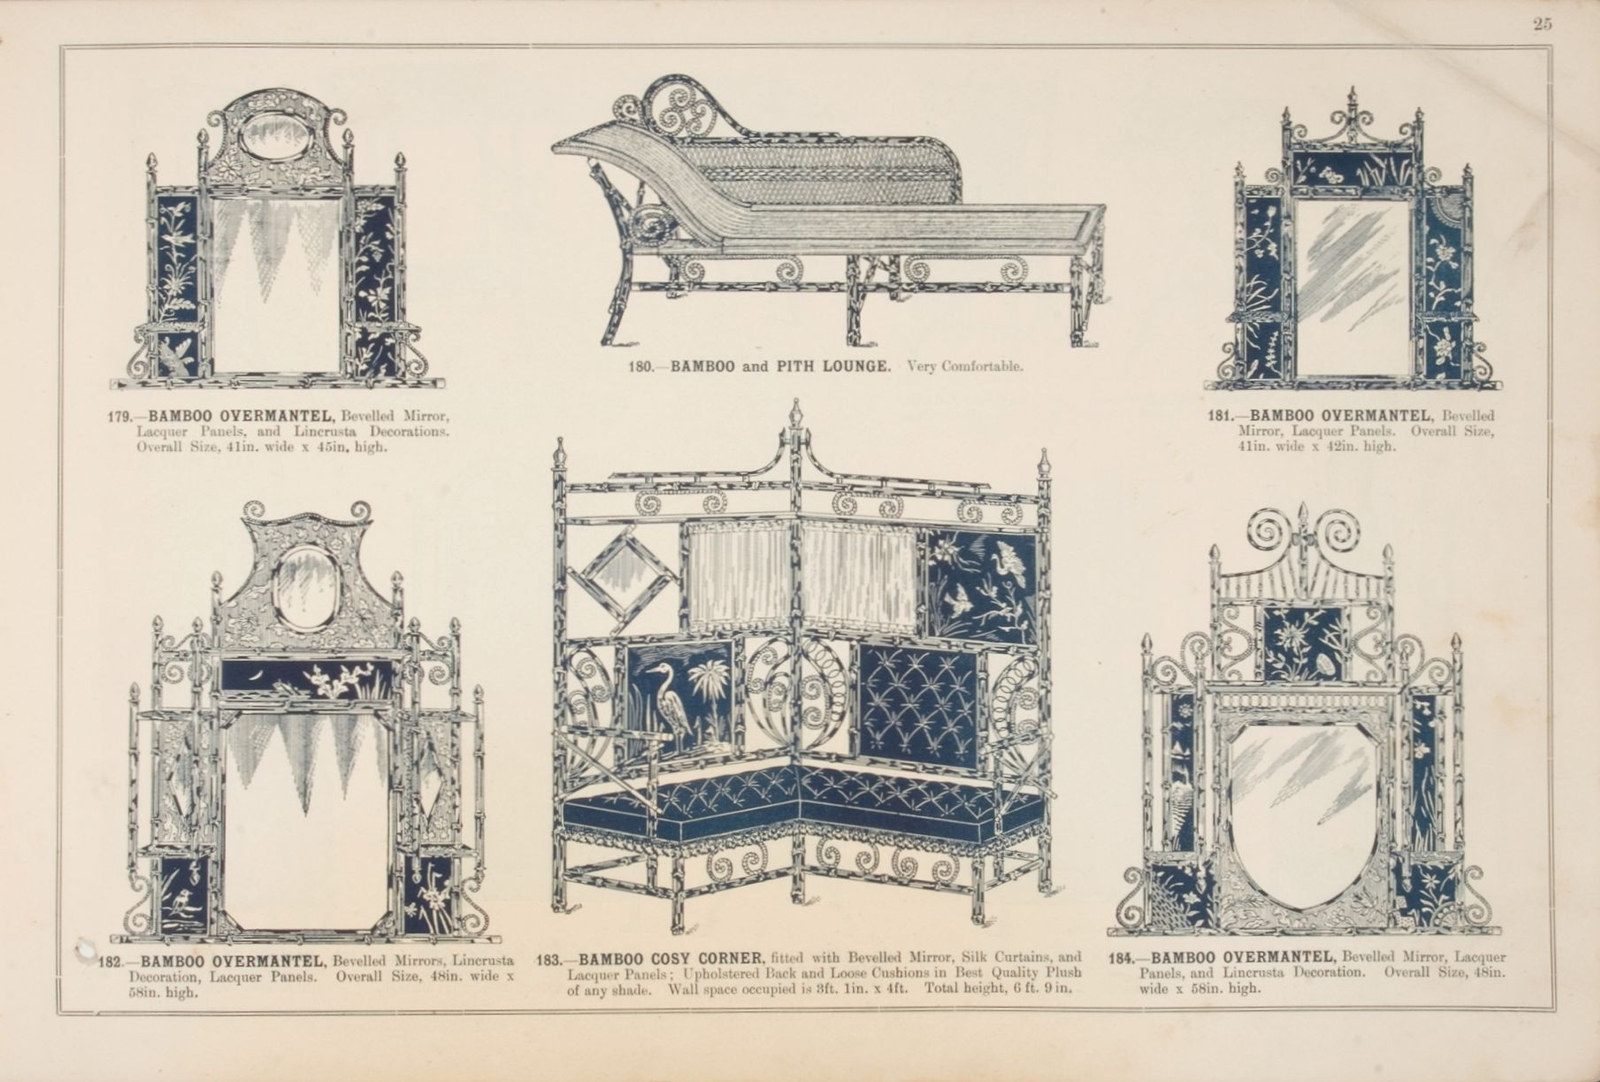 Bamboo furniture in W. W. Campbell & Co trade catalogue